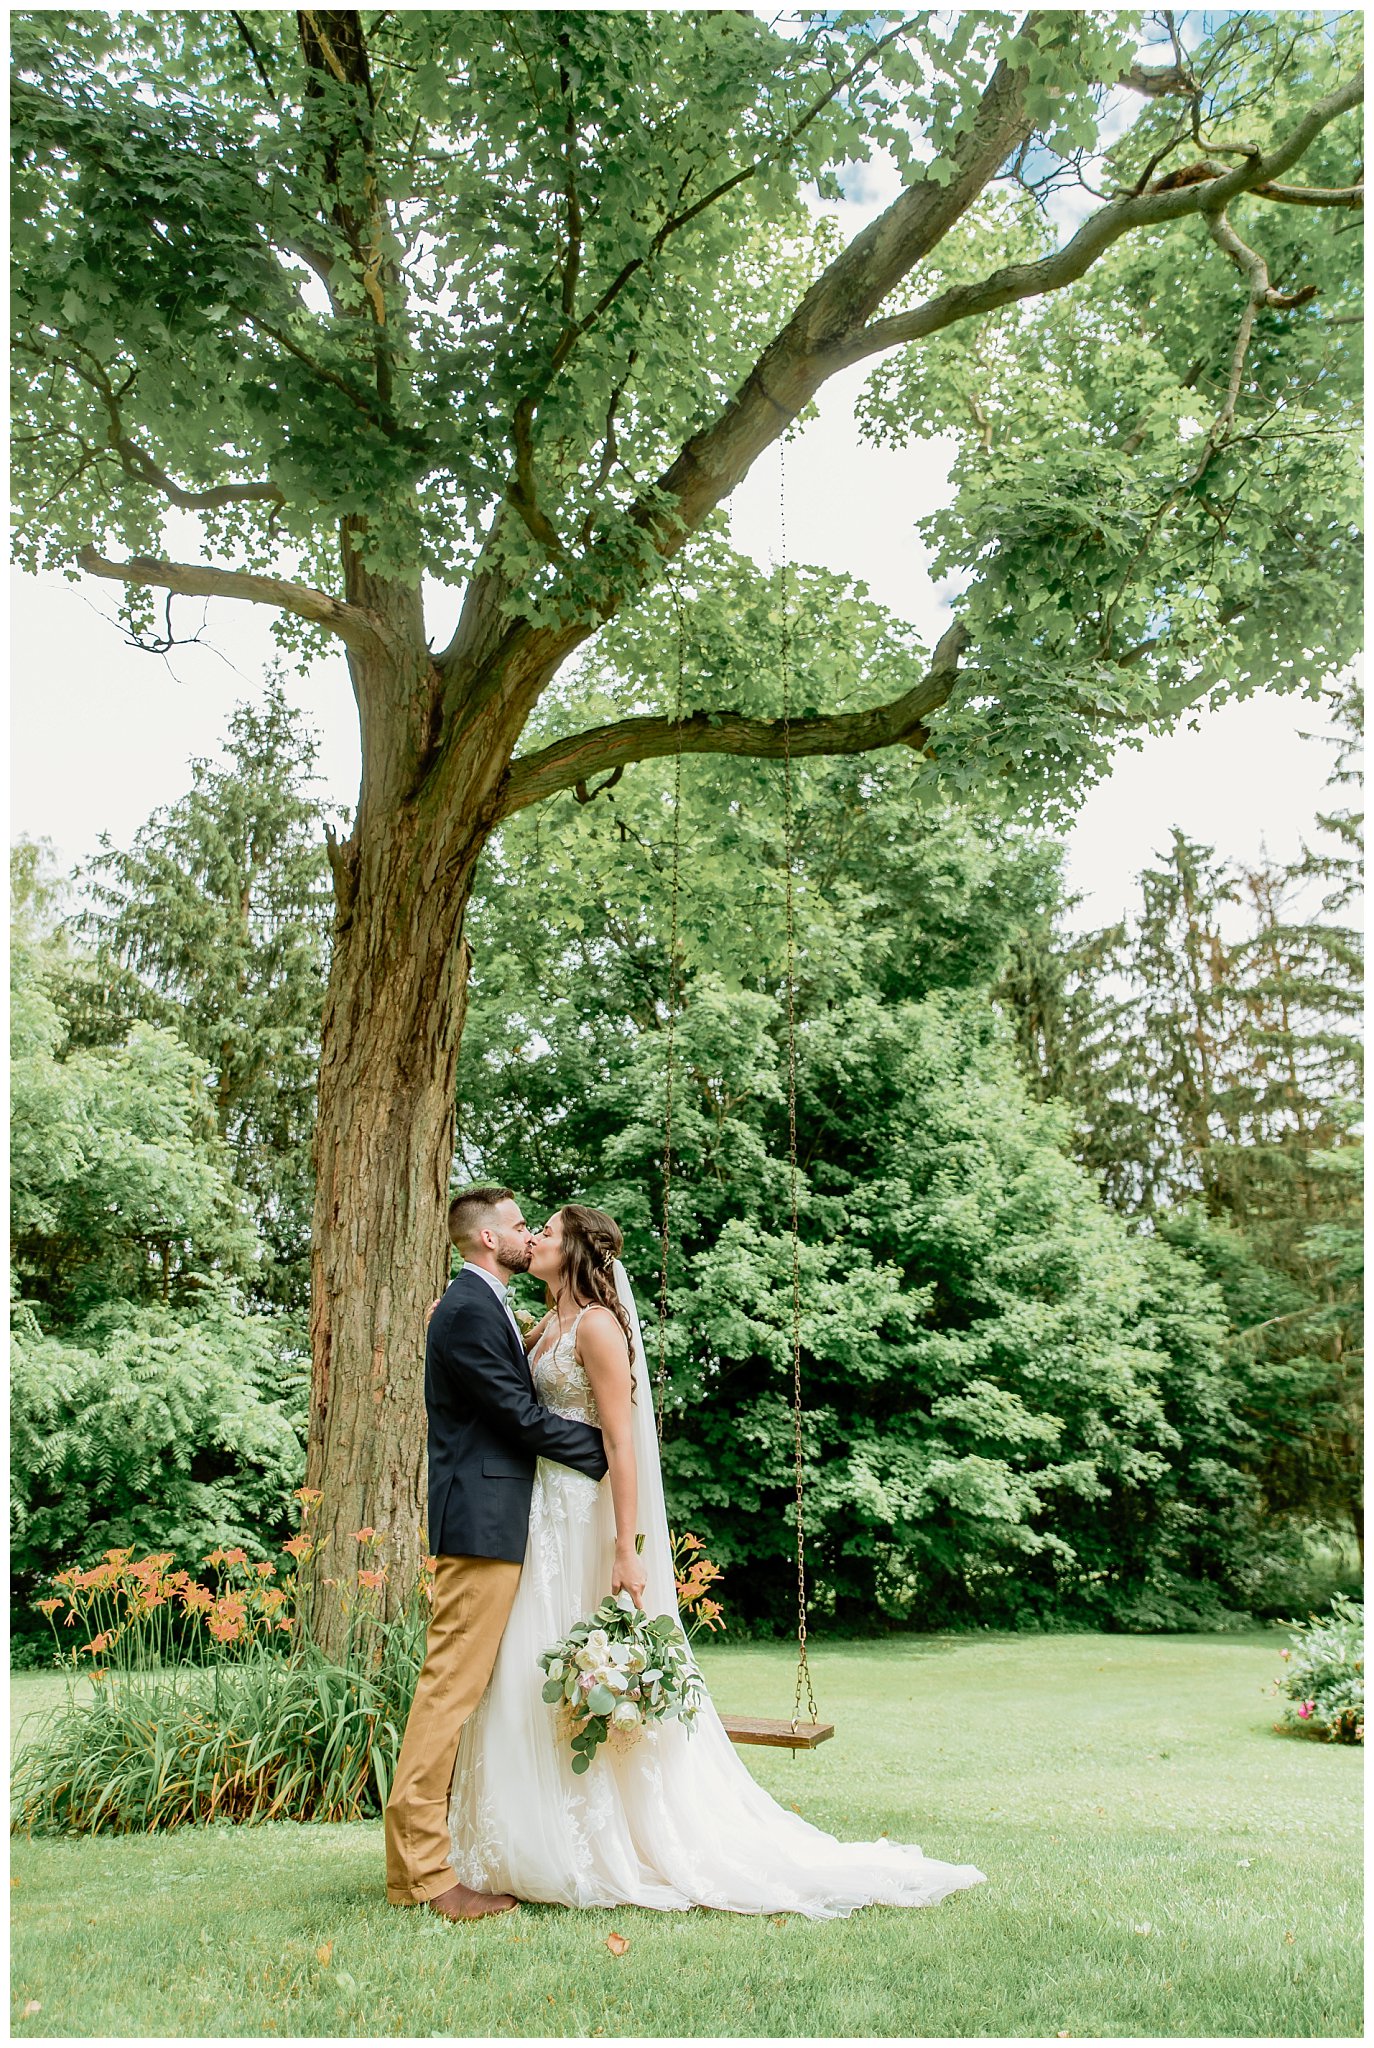 Dale and Hayley,Joanna Young Photography,Our Farm,Syracuse,Wedding Photographer,